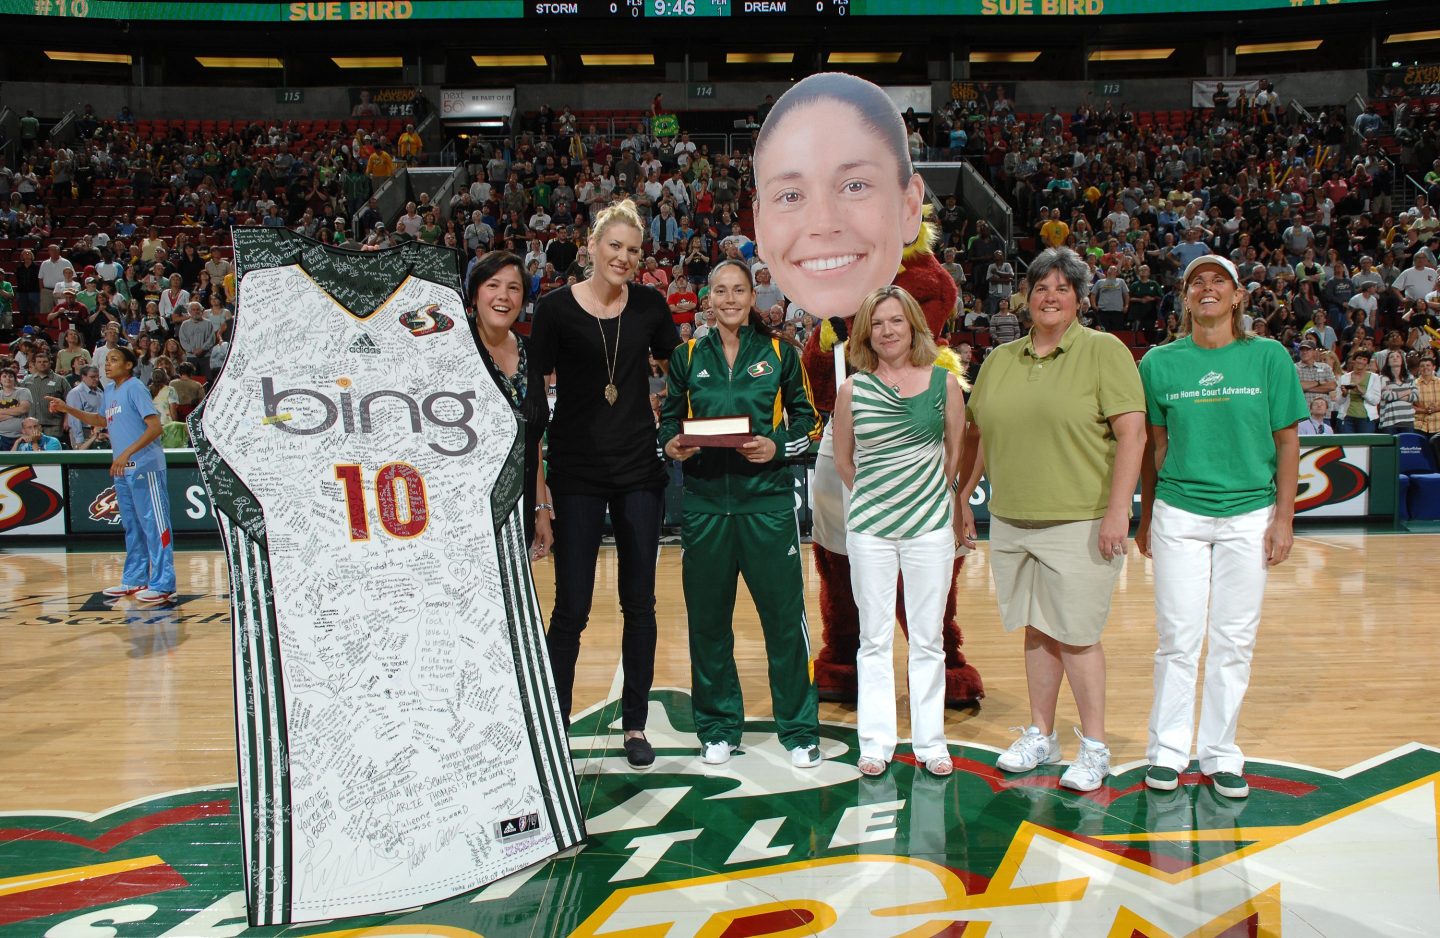 SEATTLE, WA &#8211; AUGUST 13: Sue Bird #10 of the Seattle Storm celebrates ten years with the team along side CEO Karen Bryant, Lauren Jackson #15 and team owners Dawn Trudeau, Lisa Brummel and Ginny Gilder before the game against the Atlanta Dream on August 13, 2011 at Key Arena in Seattle, Washington.  NOTE TO USER:User expressly acknowledges and agrees that, by downloading and/or using this Photograph, user is consenting to the terms and conditions of the Getty Images License Agreement. Mandatory Copyright Notice: Copyright 2011 NBAE (Photo by Terrence Vaccaro /NBAE via Getty Images).